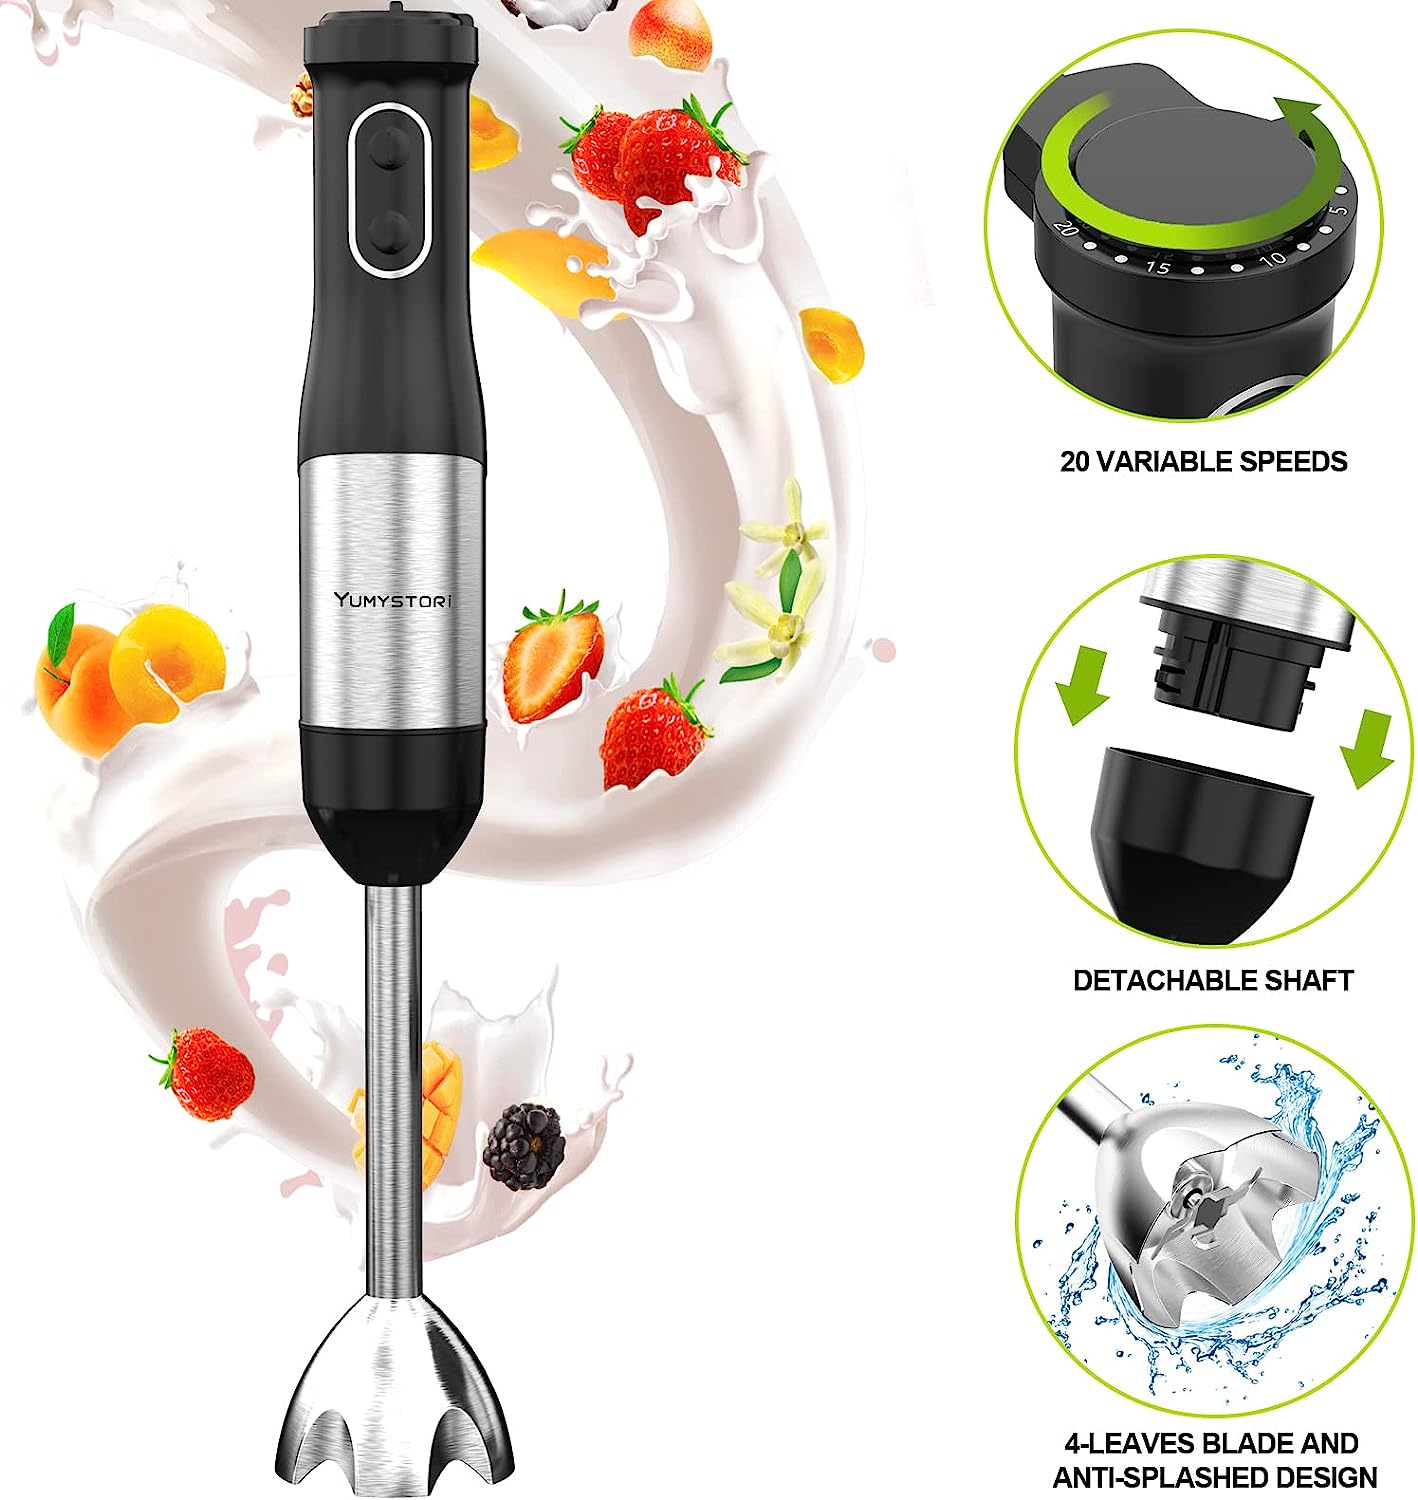 Electric Immersion Hand Blender(Black),Mixer,Chopper,Powerful 180 Watt Ice  Crushing 2-Speed Control One Hand Mixer,Removable Blending Stick For Easy C